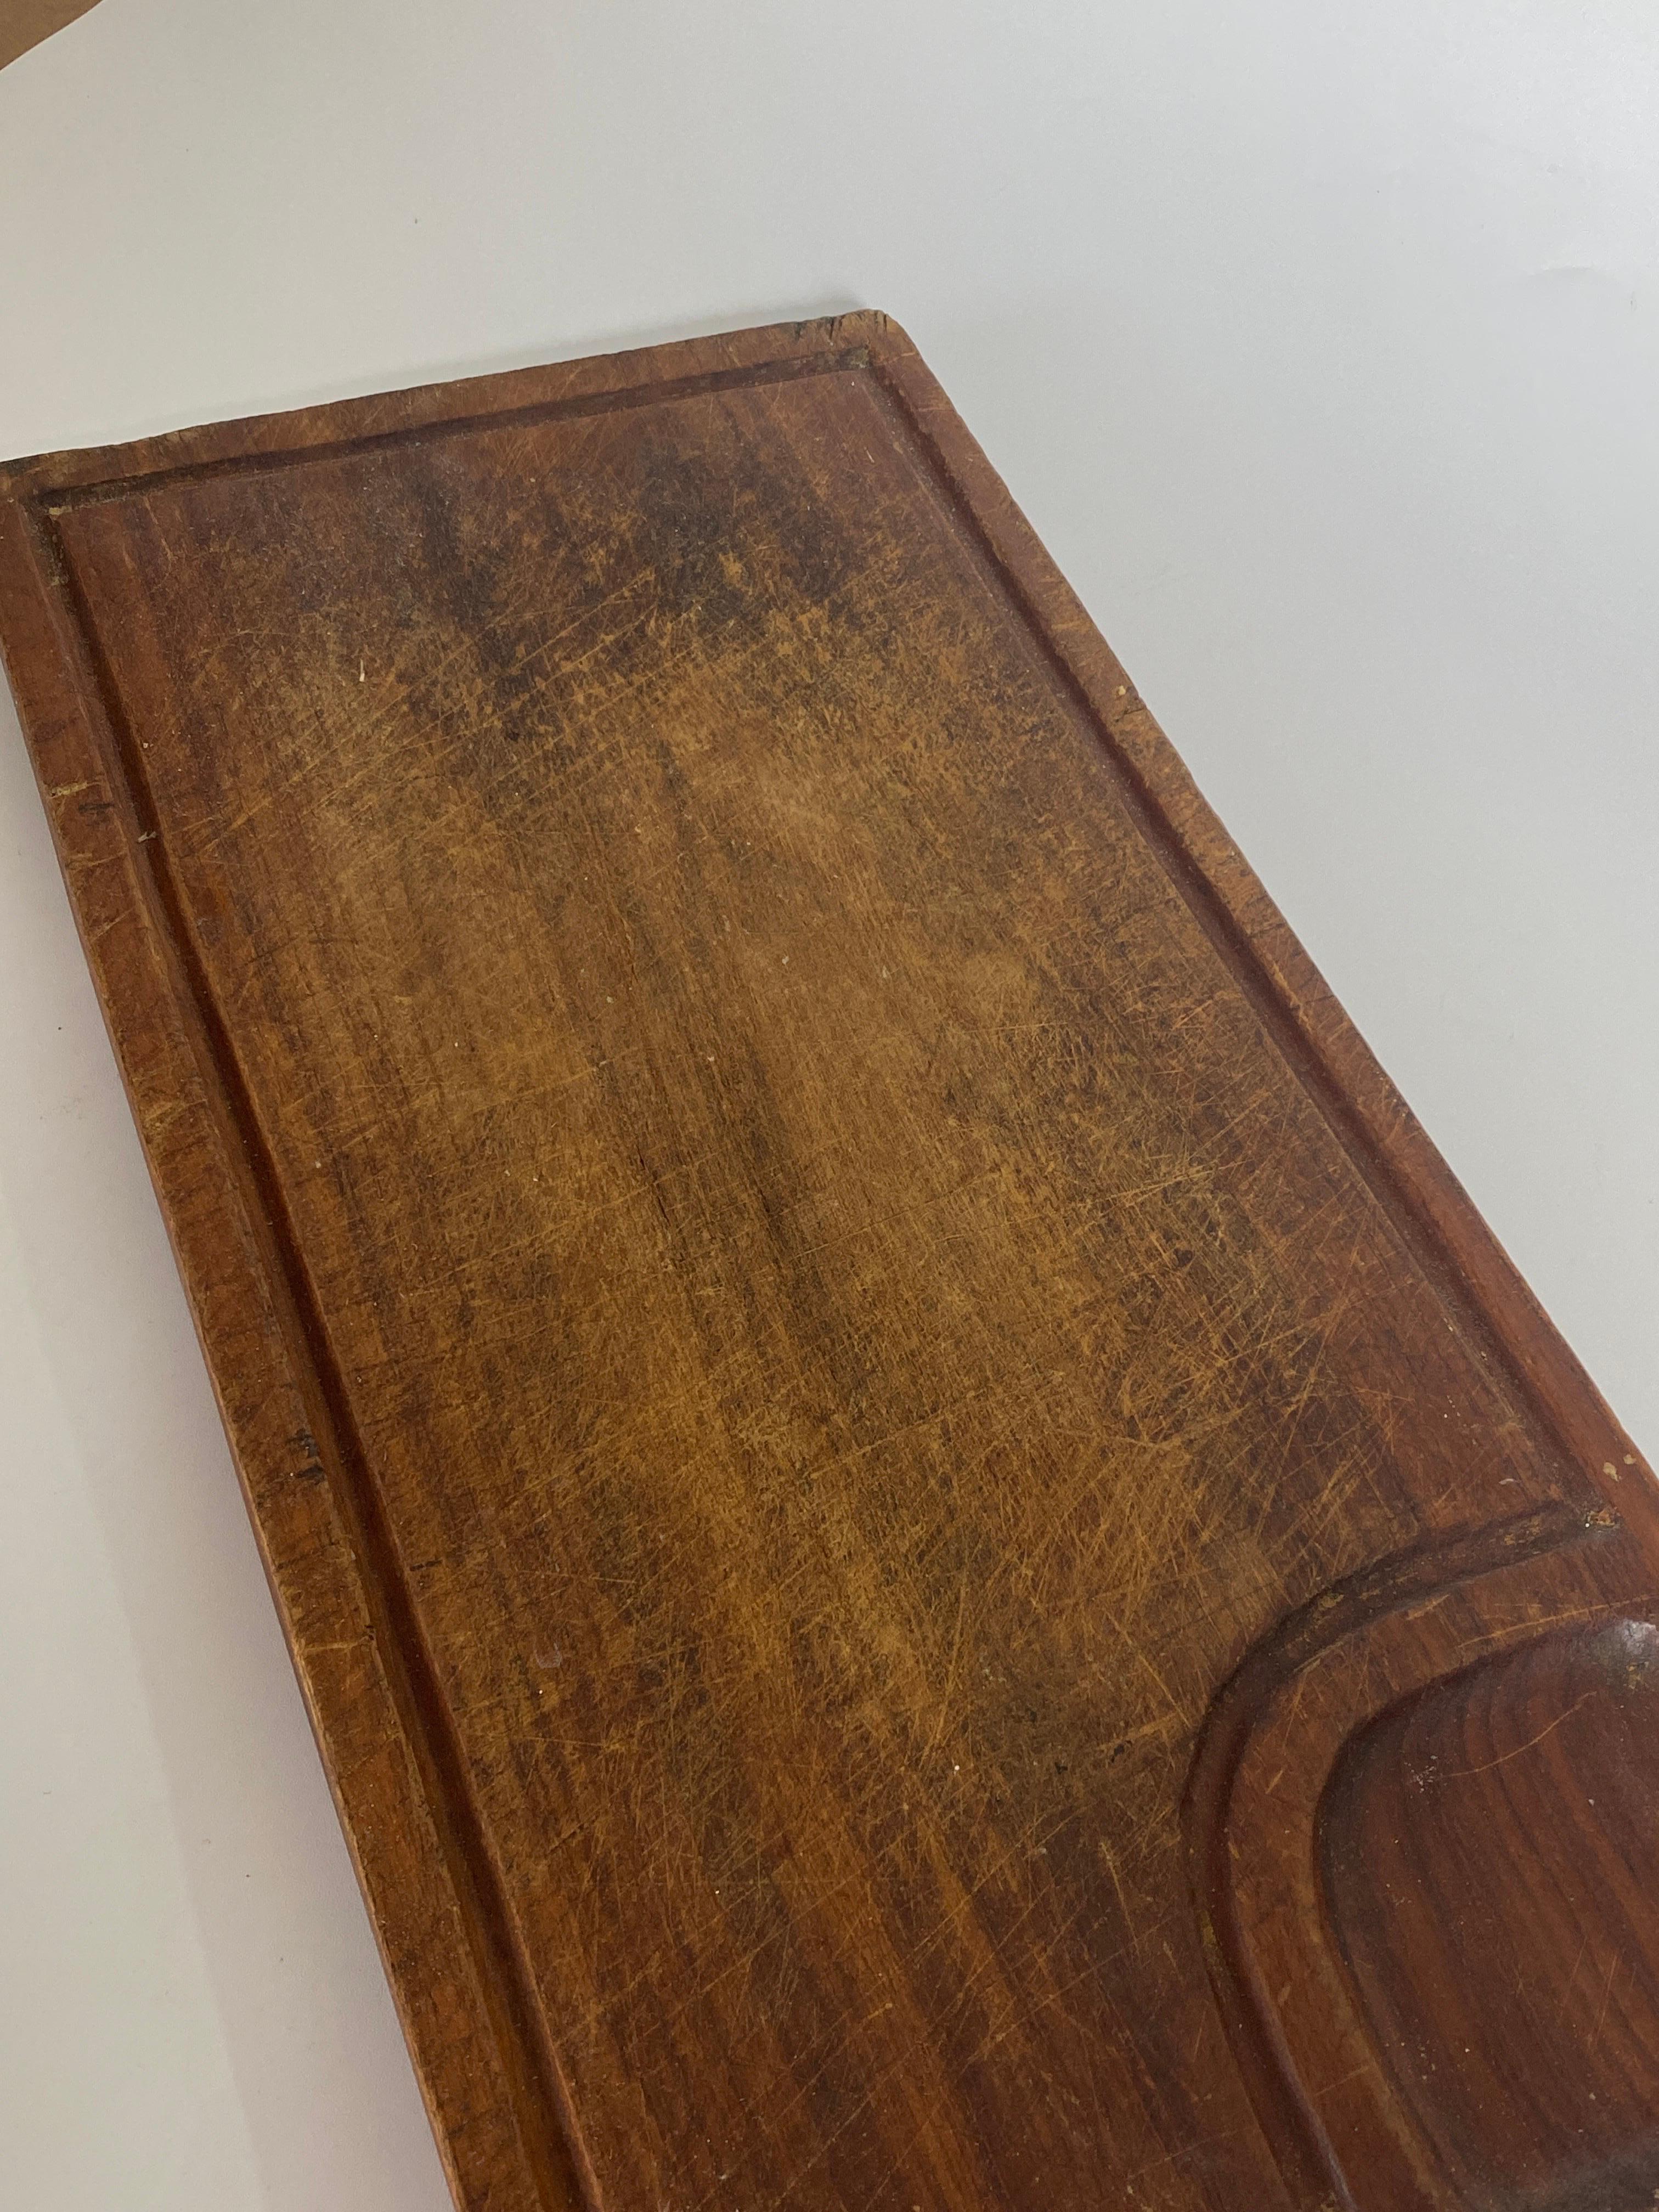 French Provincial Wooden Chopping or Cutting Board, Old Patina, Brown Color French 20th Century For Sale